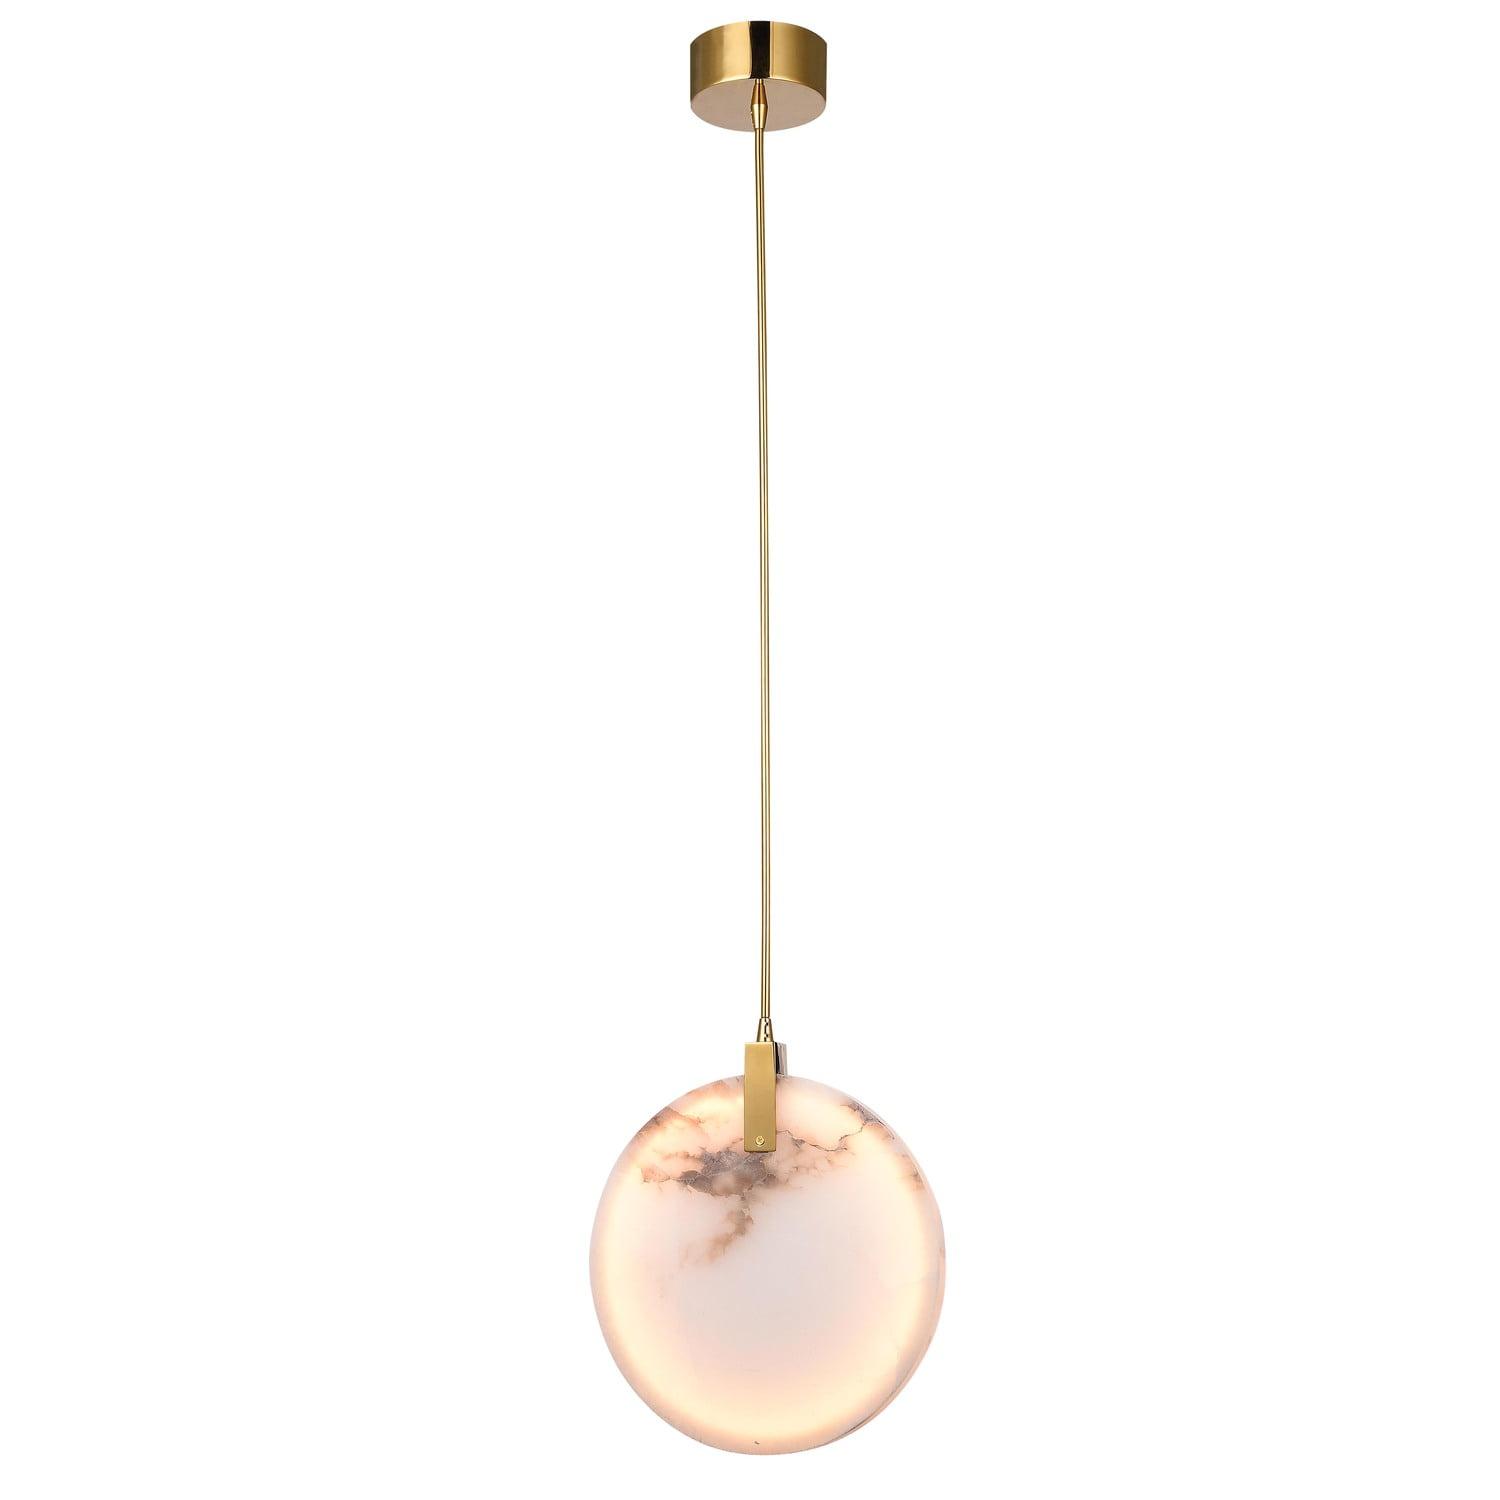 Contemporary Gold Stainless Steel & Marble Globe LED Pendant